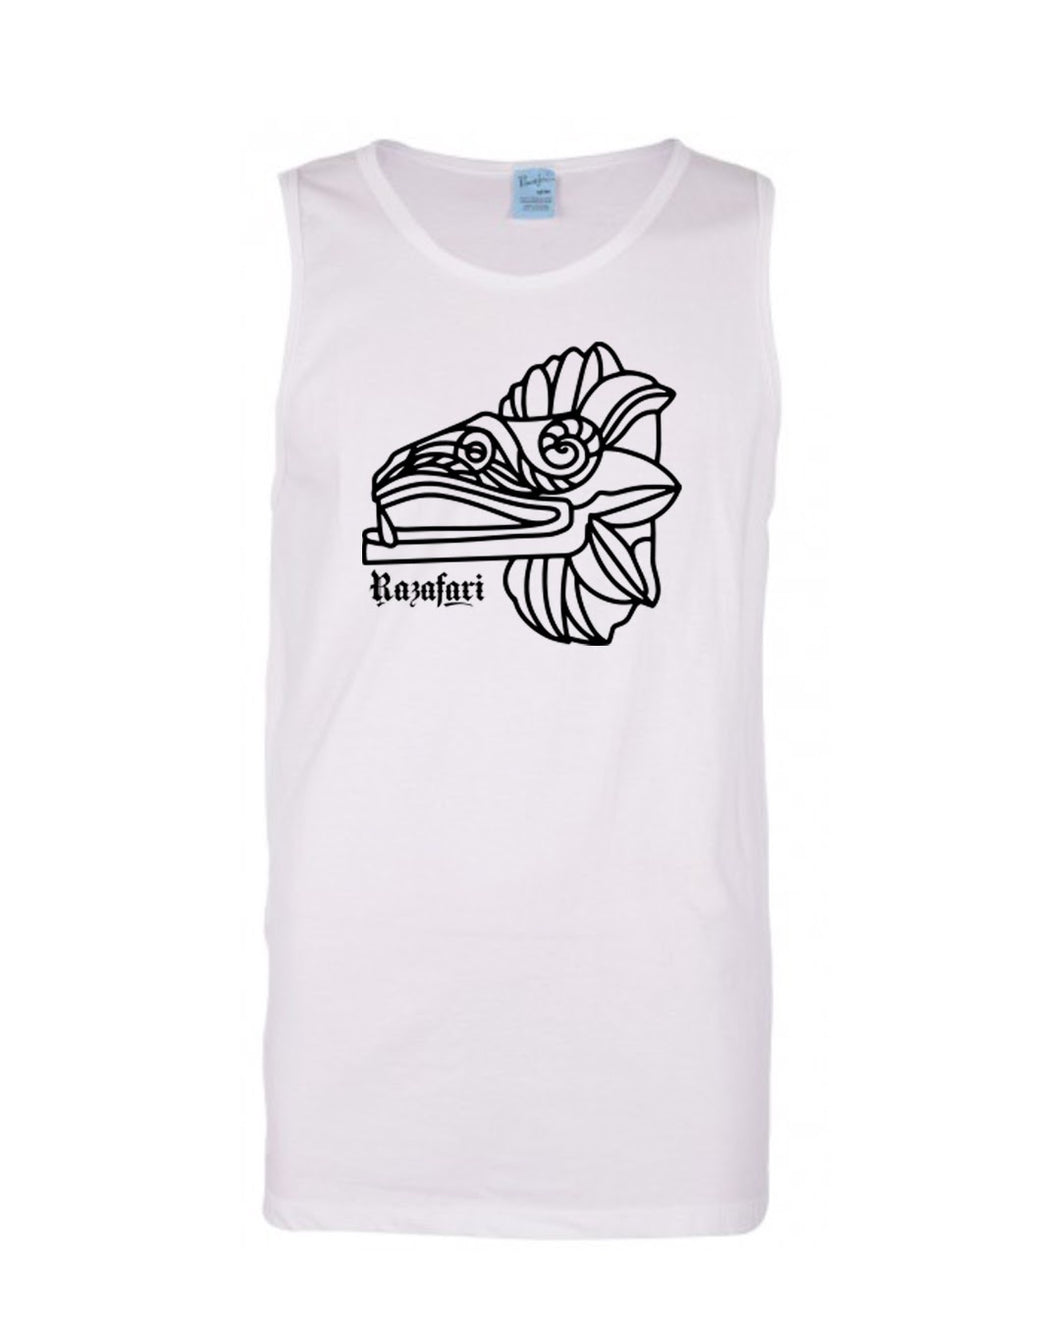 Feathered Serpent Men's Tank Top - White